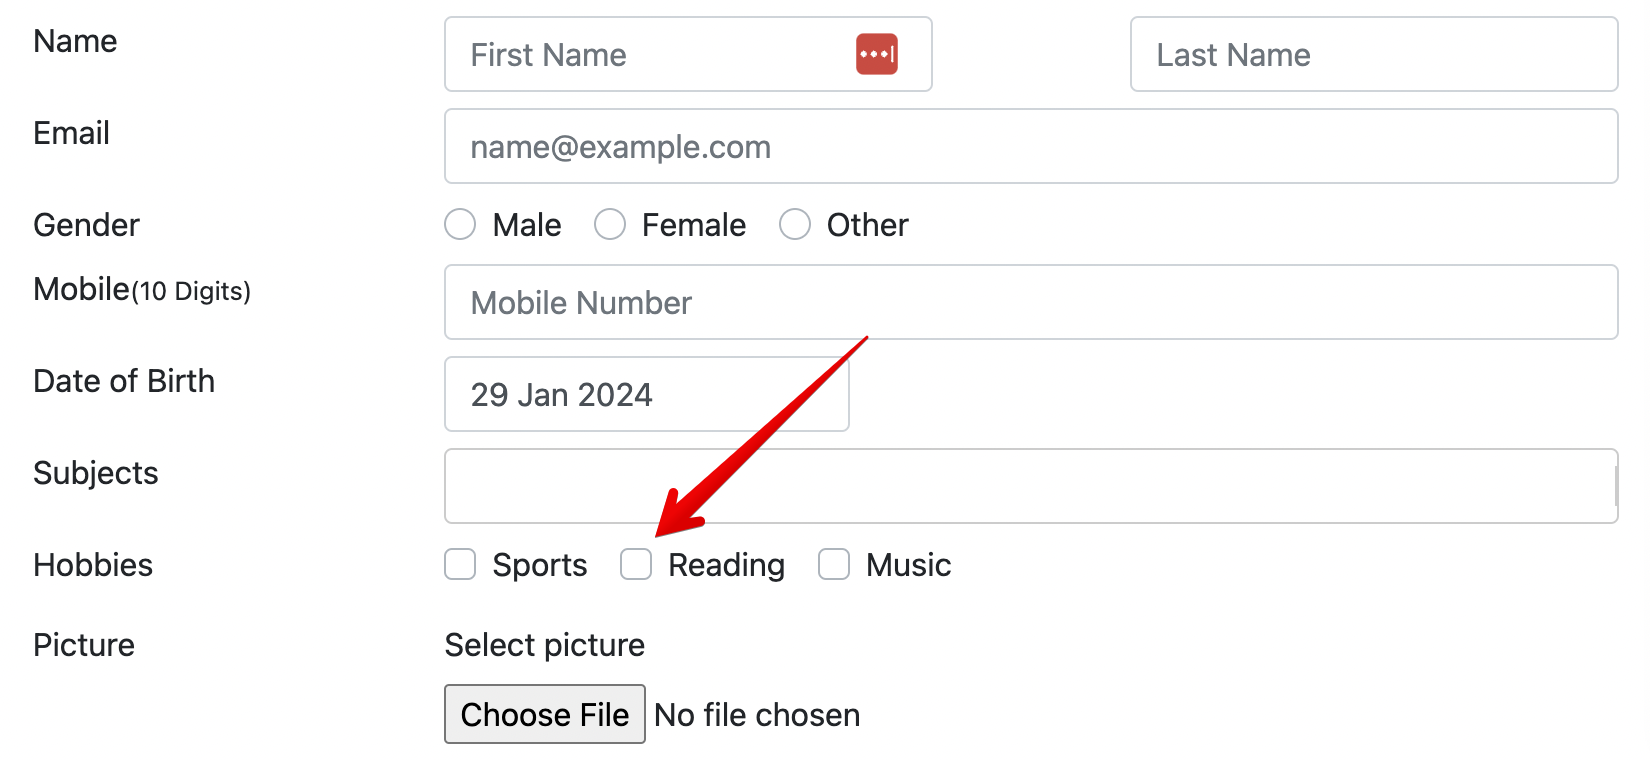 The form with checkbox that should be clicked